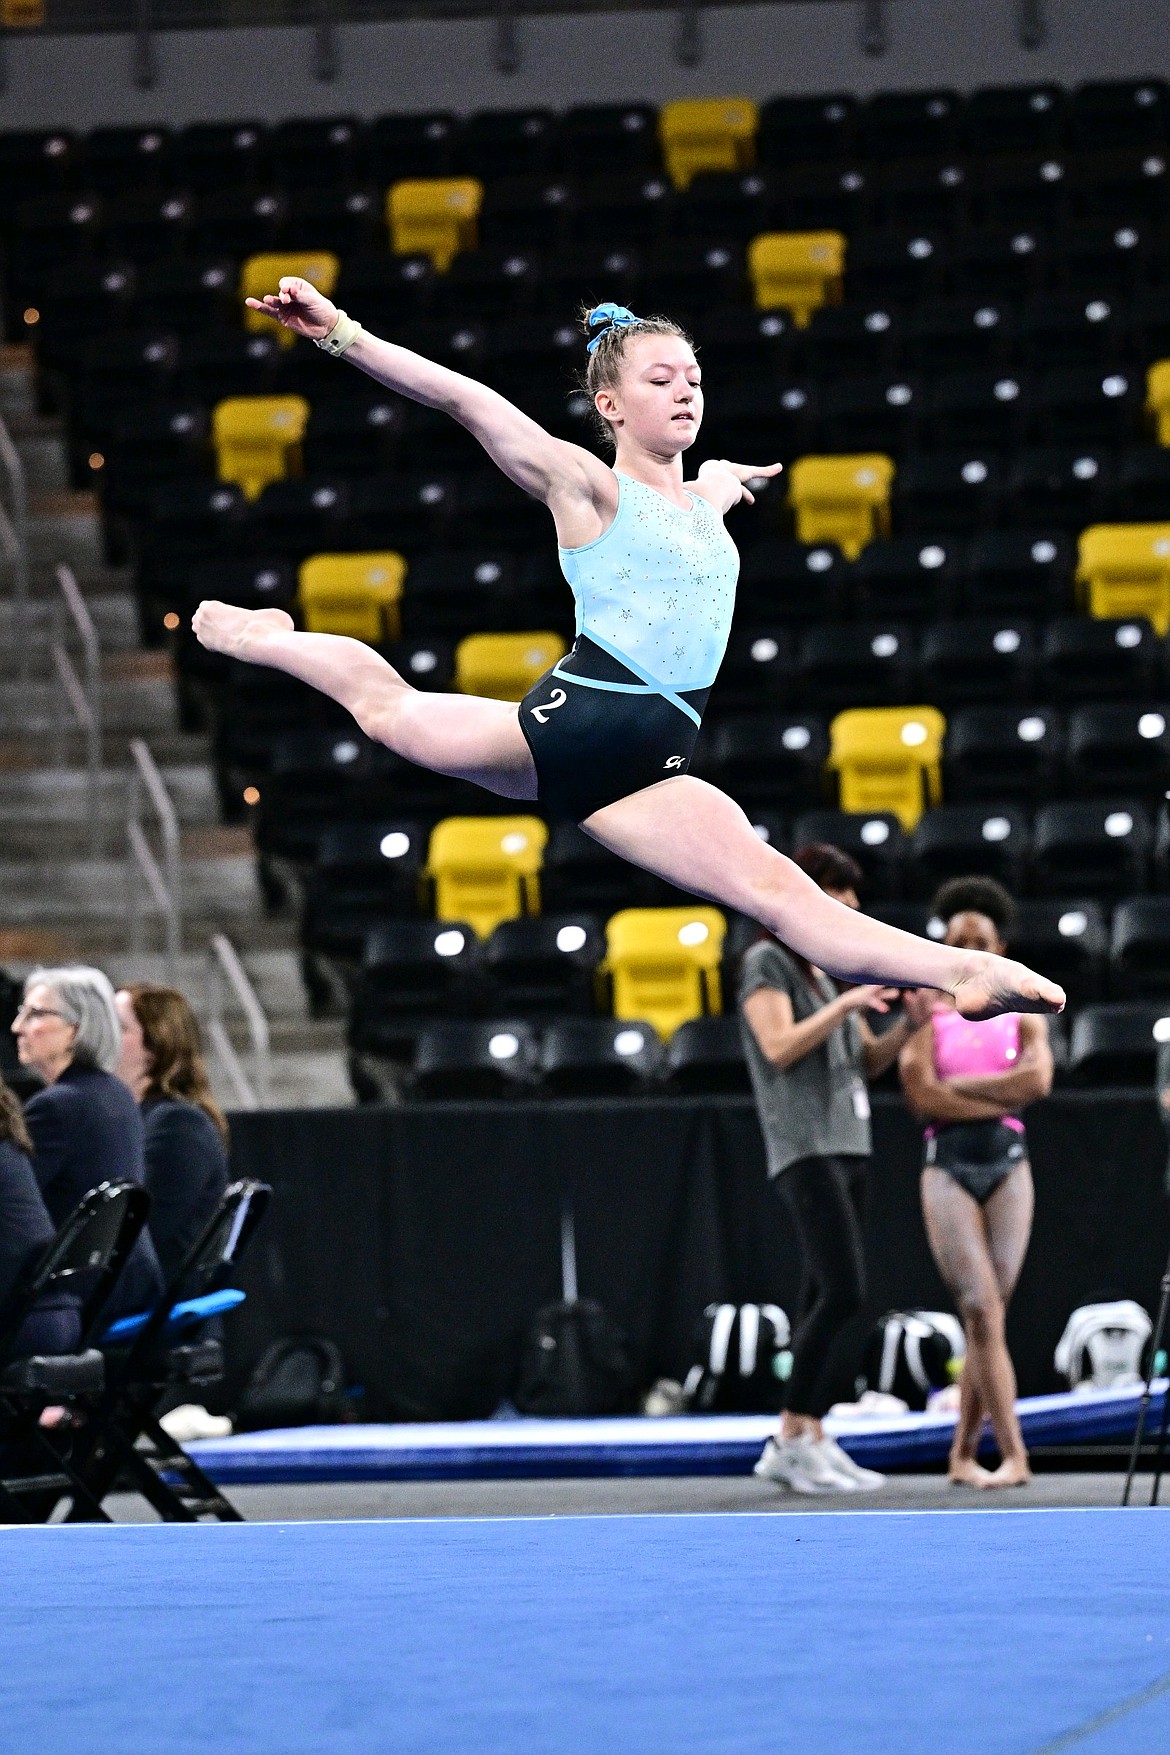 Courtesy photo
Madeline Hoare traveled to Coralville, Iowa to represent Technique Gymnasts and Region 2 in the Level 9 Western Championships and received a 9.175 on Vault and 9.1 on Floor.